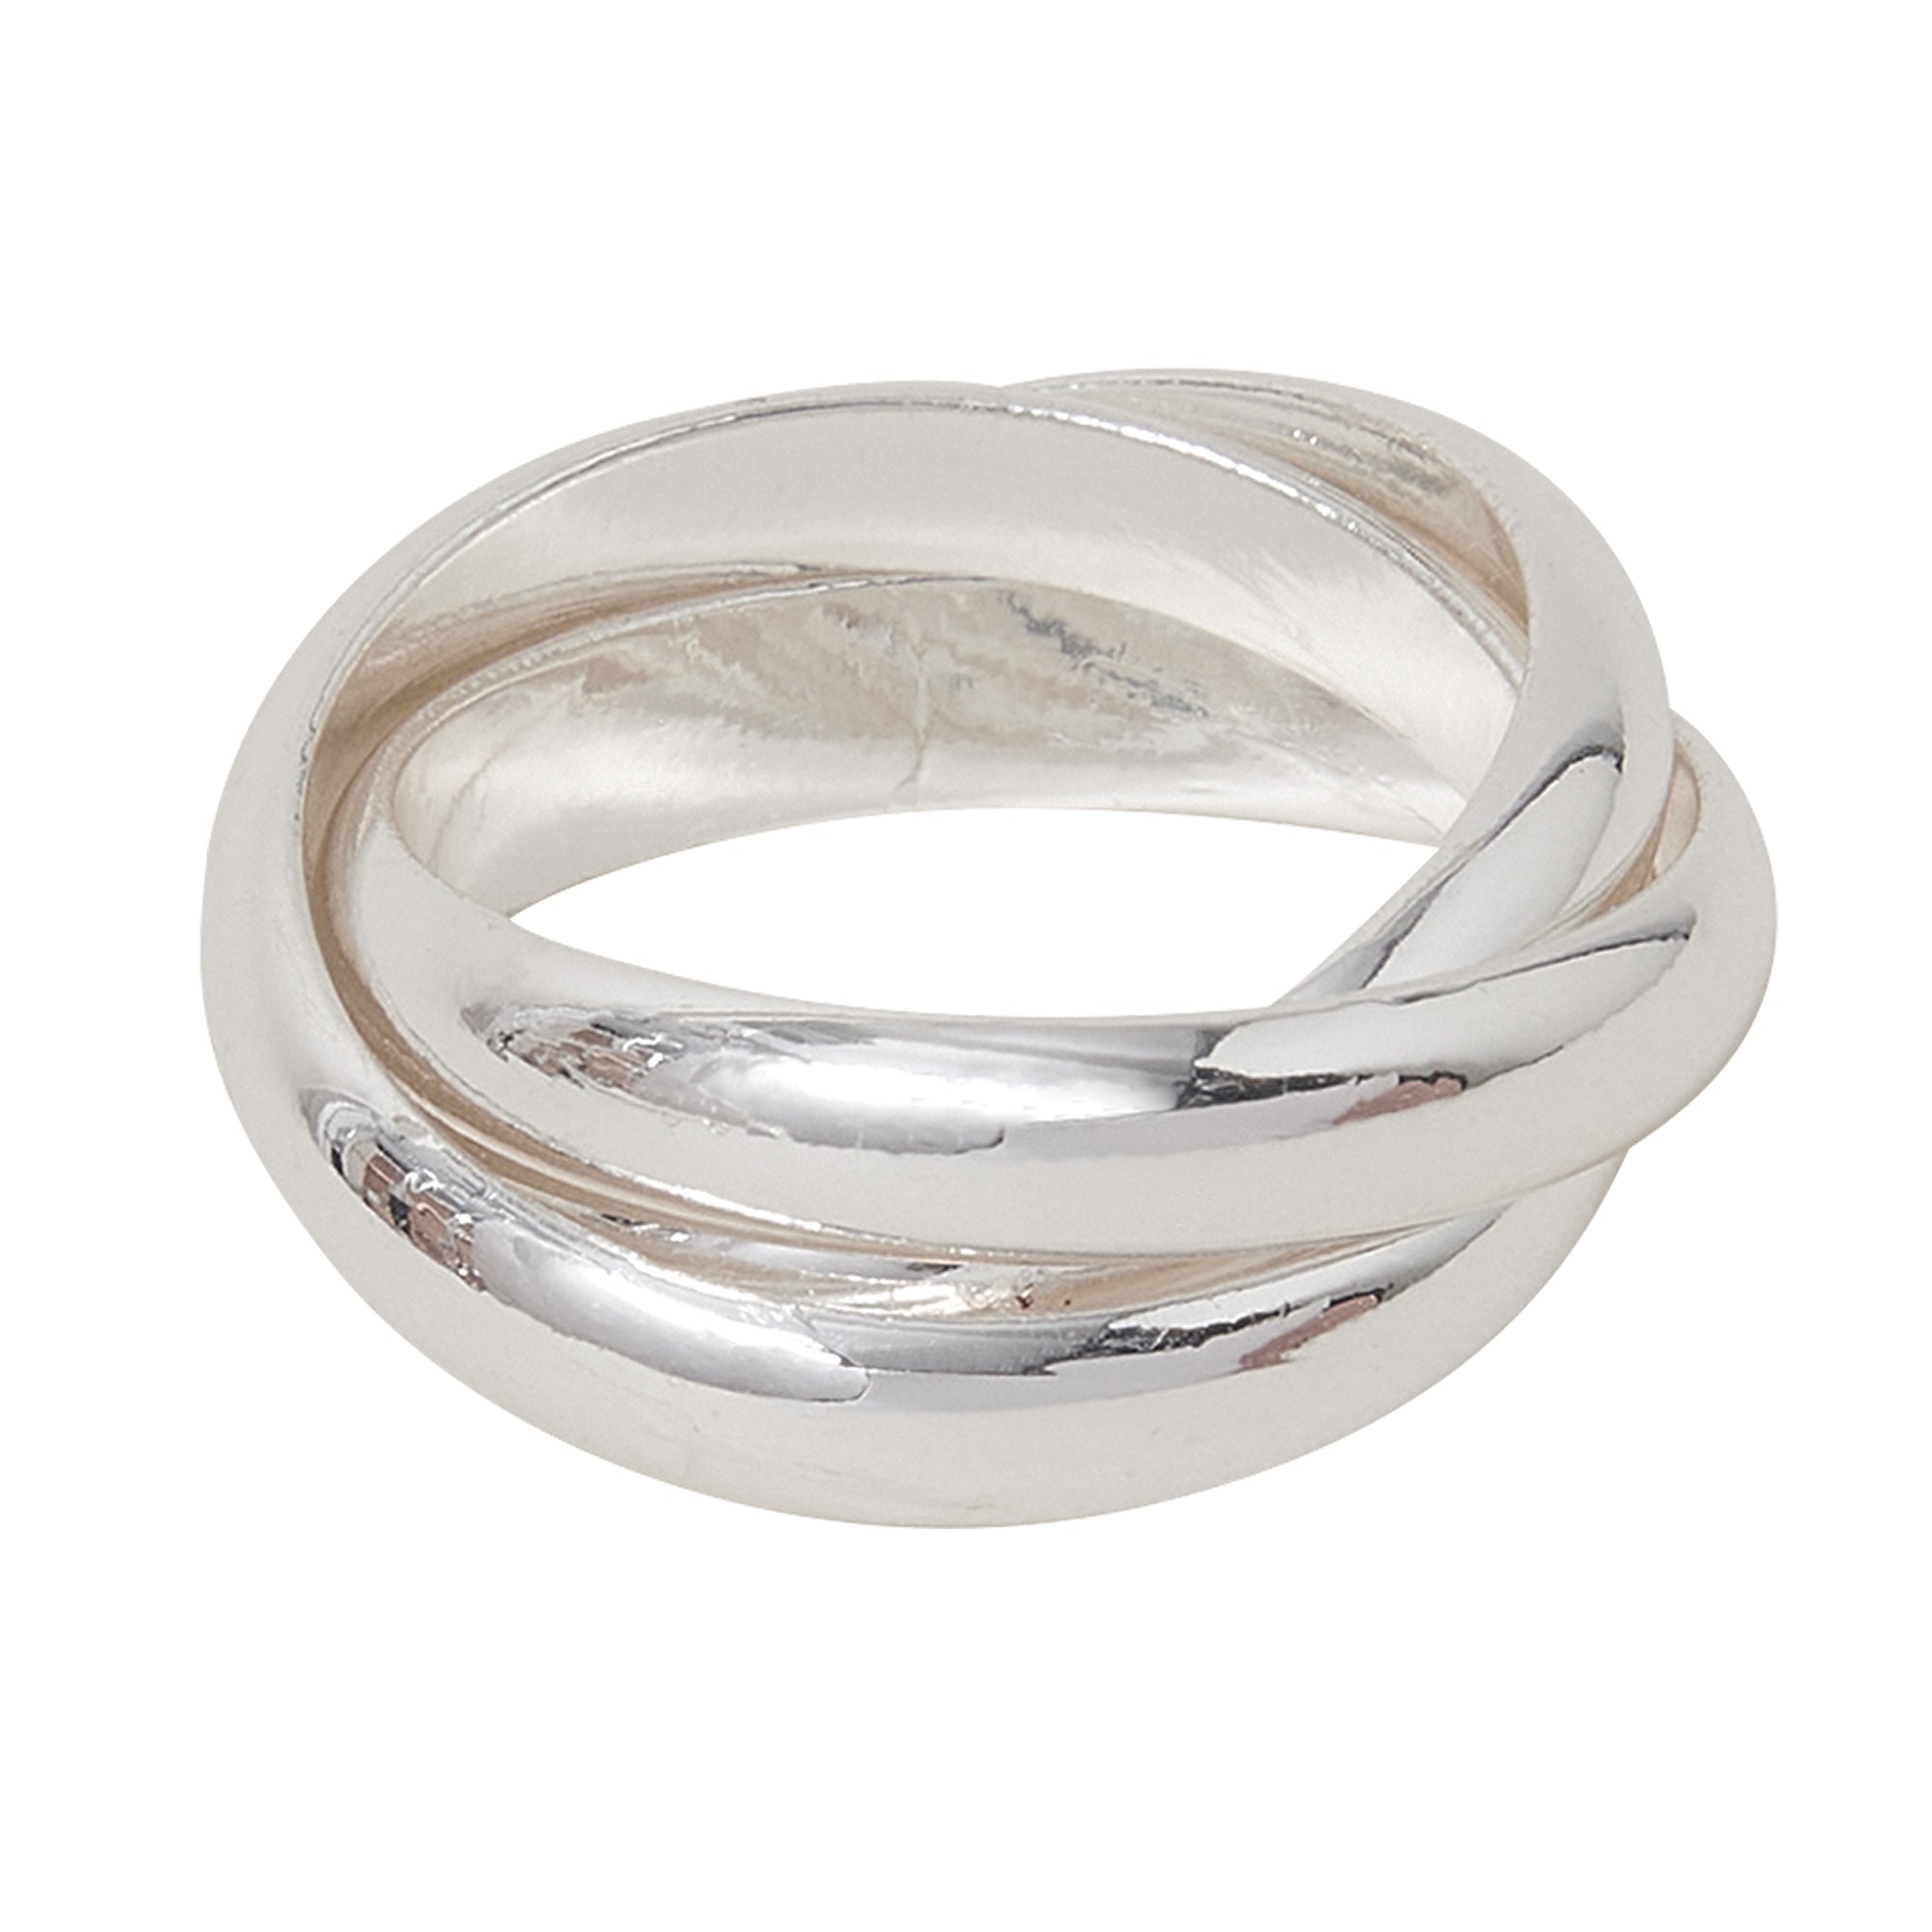 Women's Small Silver Plated Twisted Ring Silver